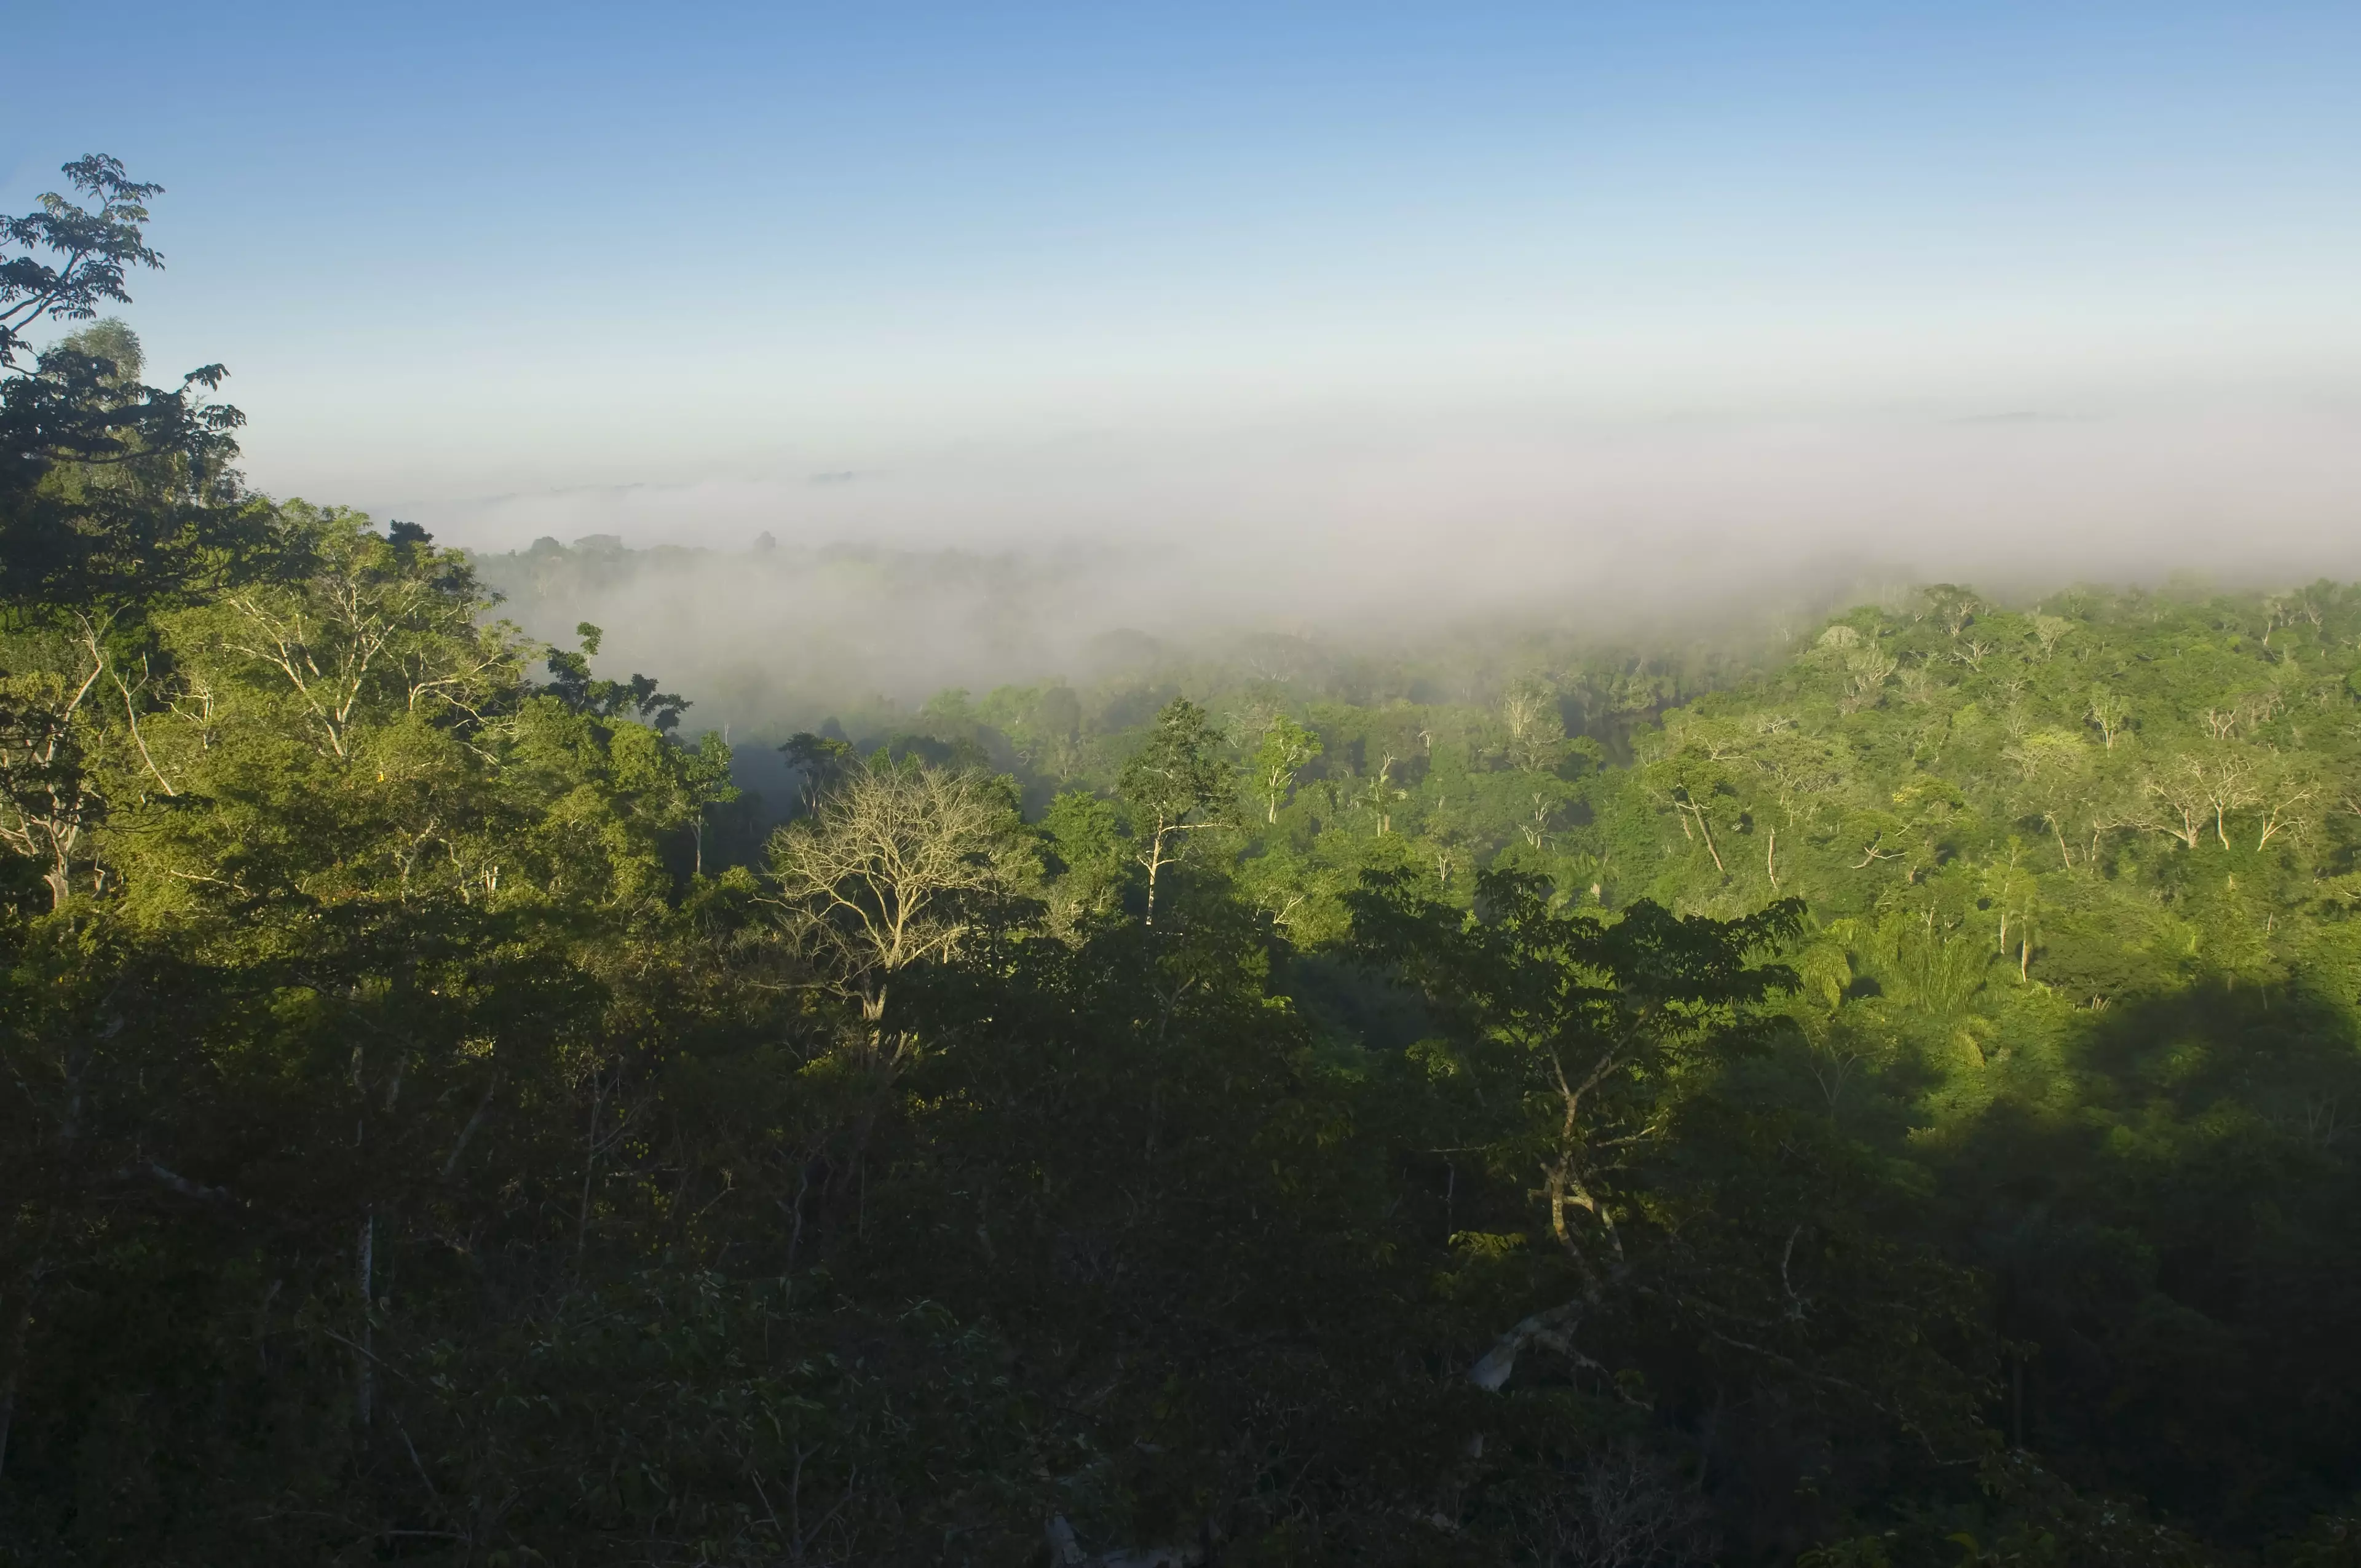 Scientists fear ecosystems like the Amazon could disappear in a matter of years.